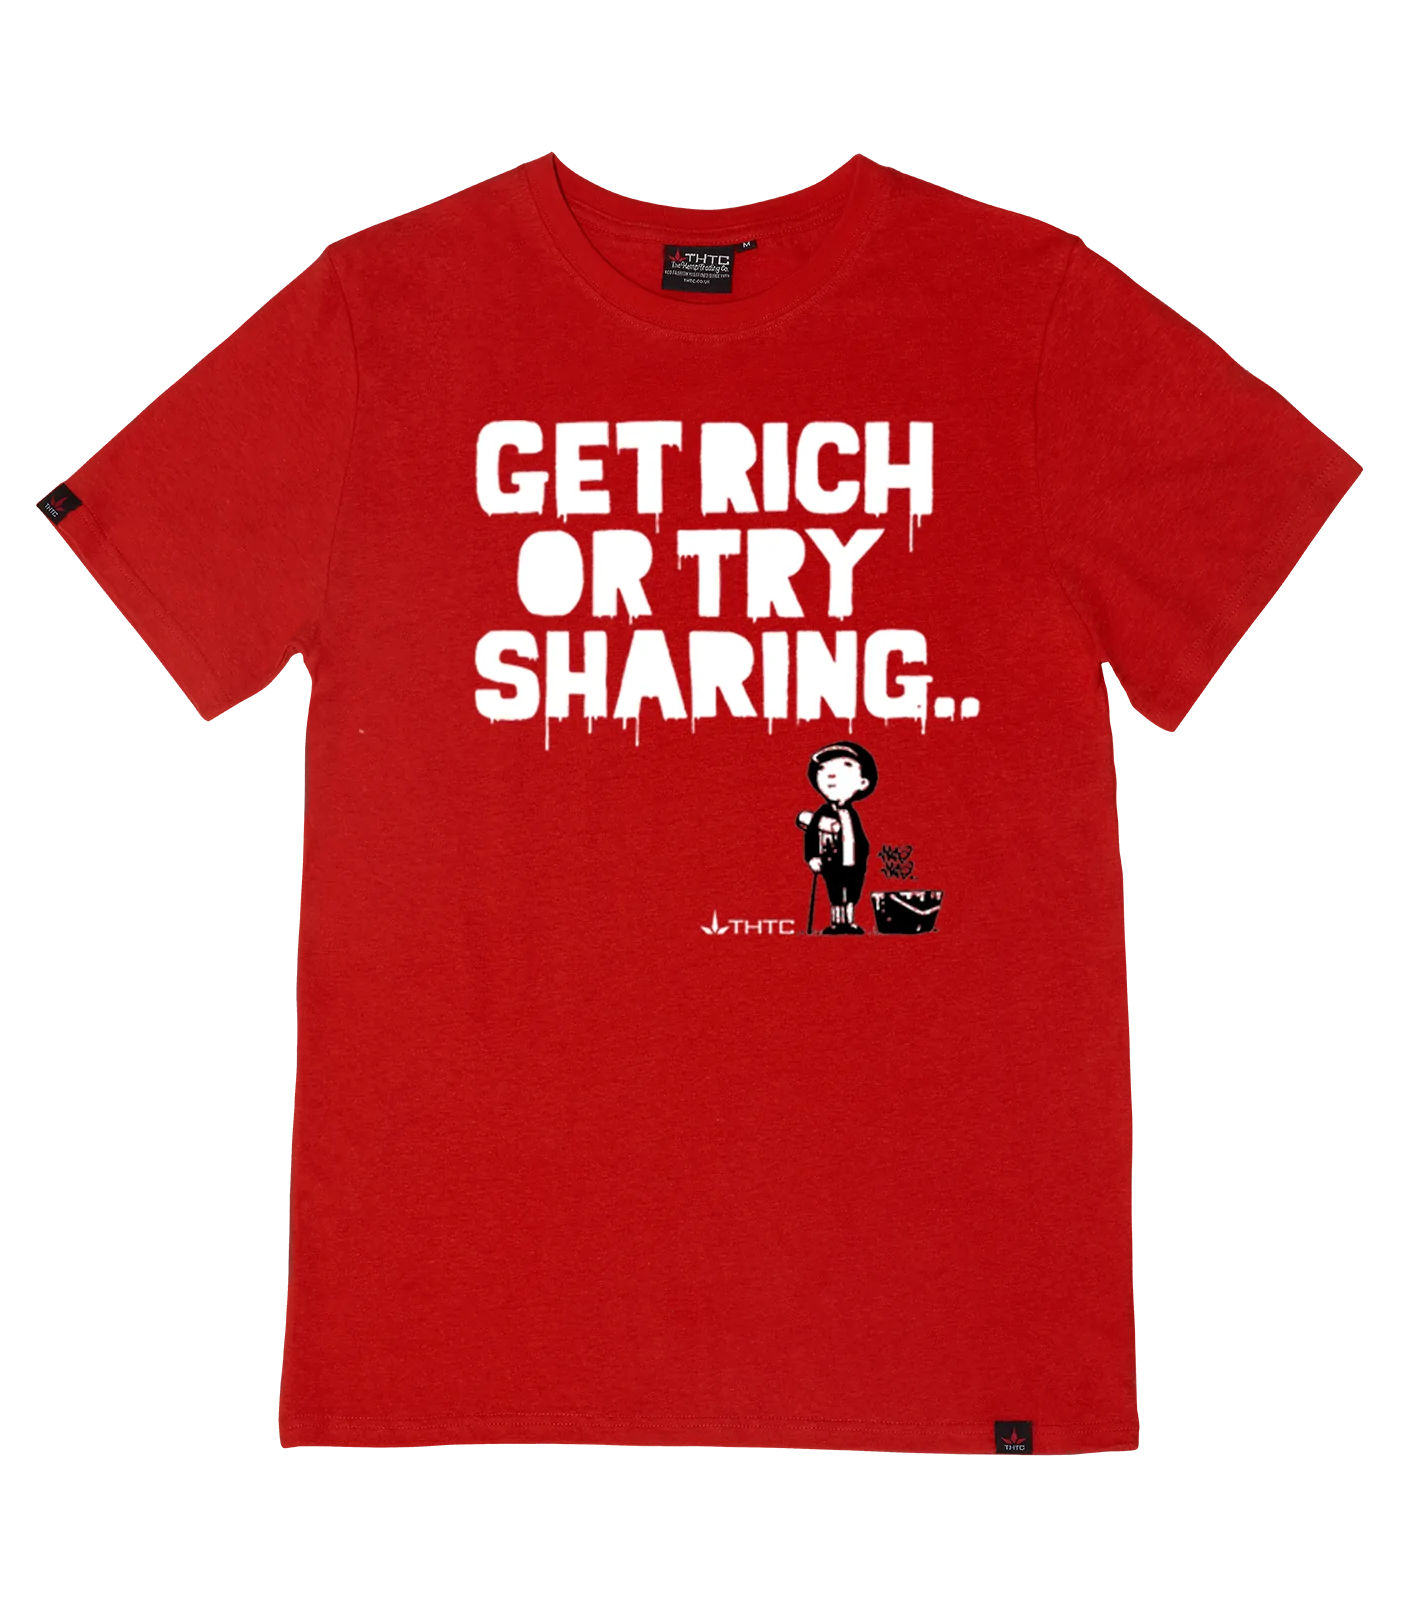 Get Rich or Try Sharing Hemp T-Shirt - Red